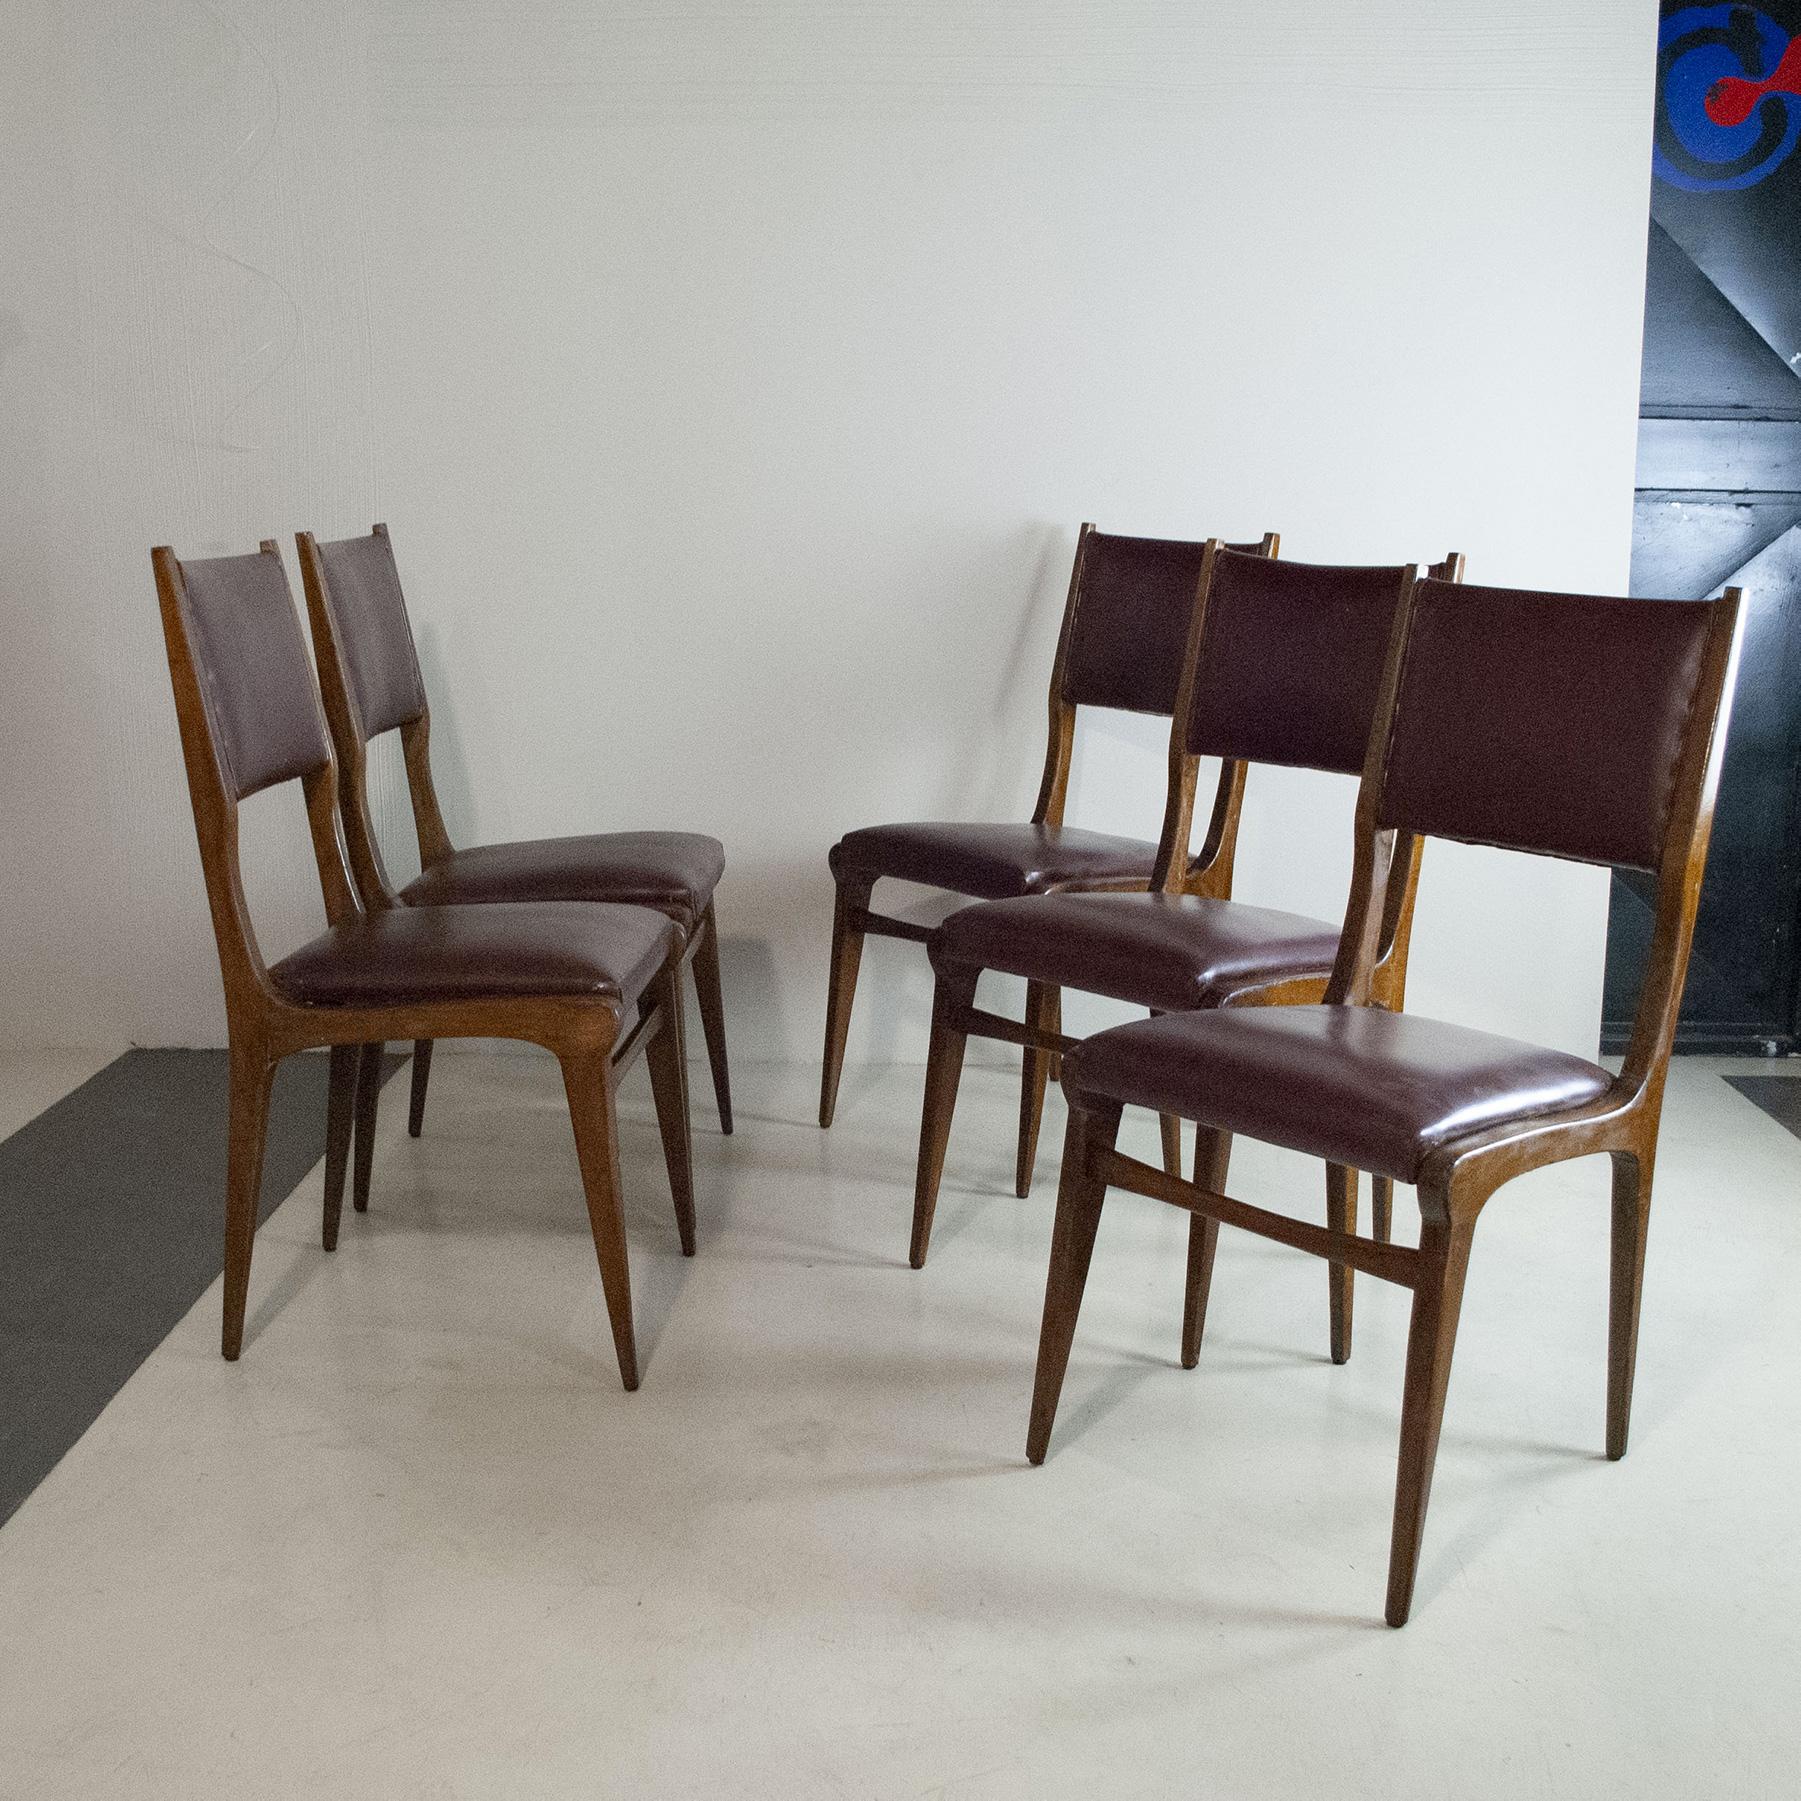 Carlo de Carli in the Style Italian Midcentury Chairs For Sale 3